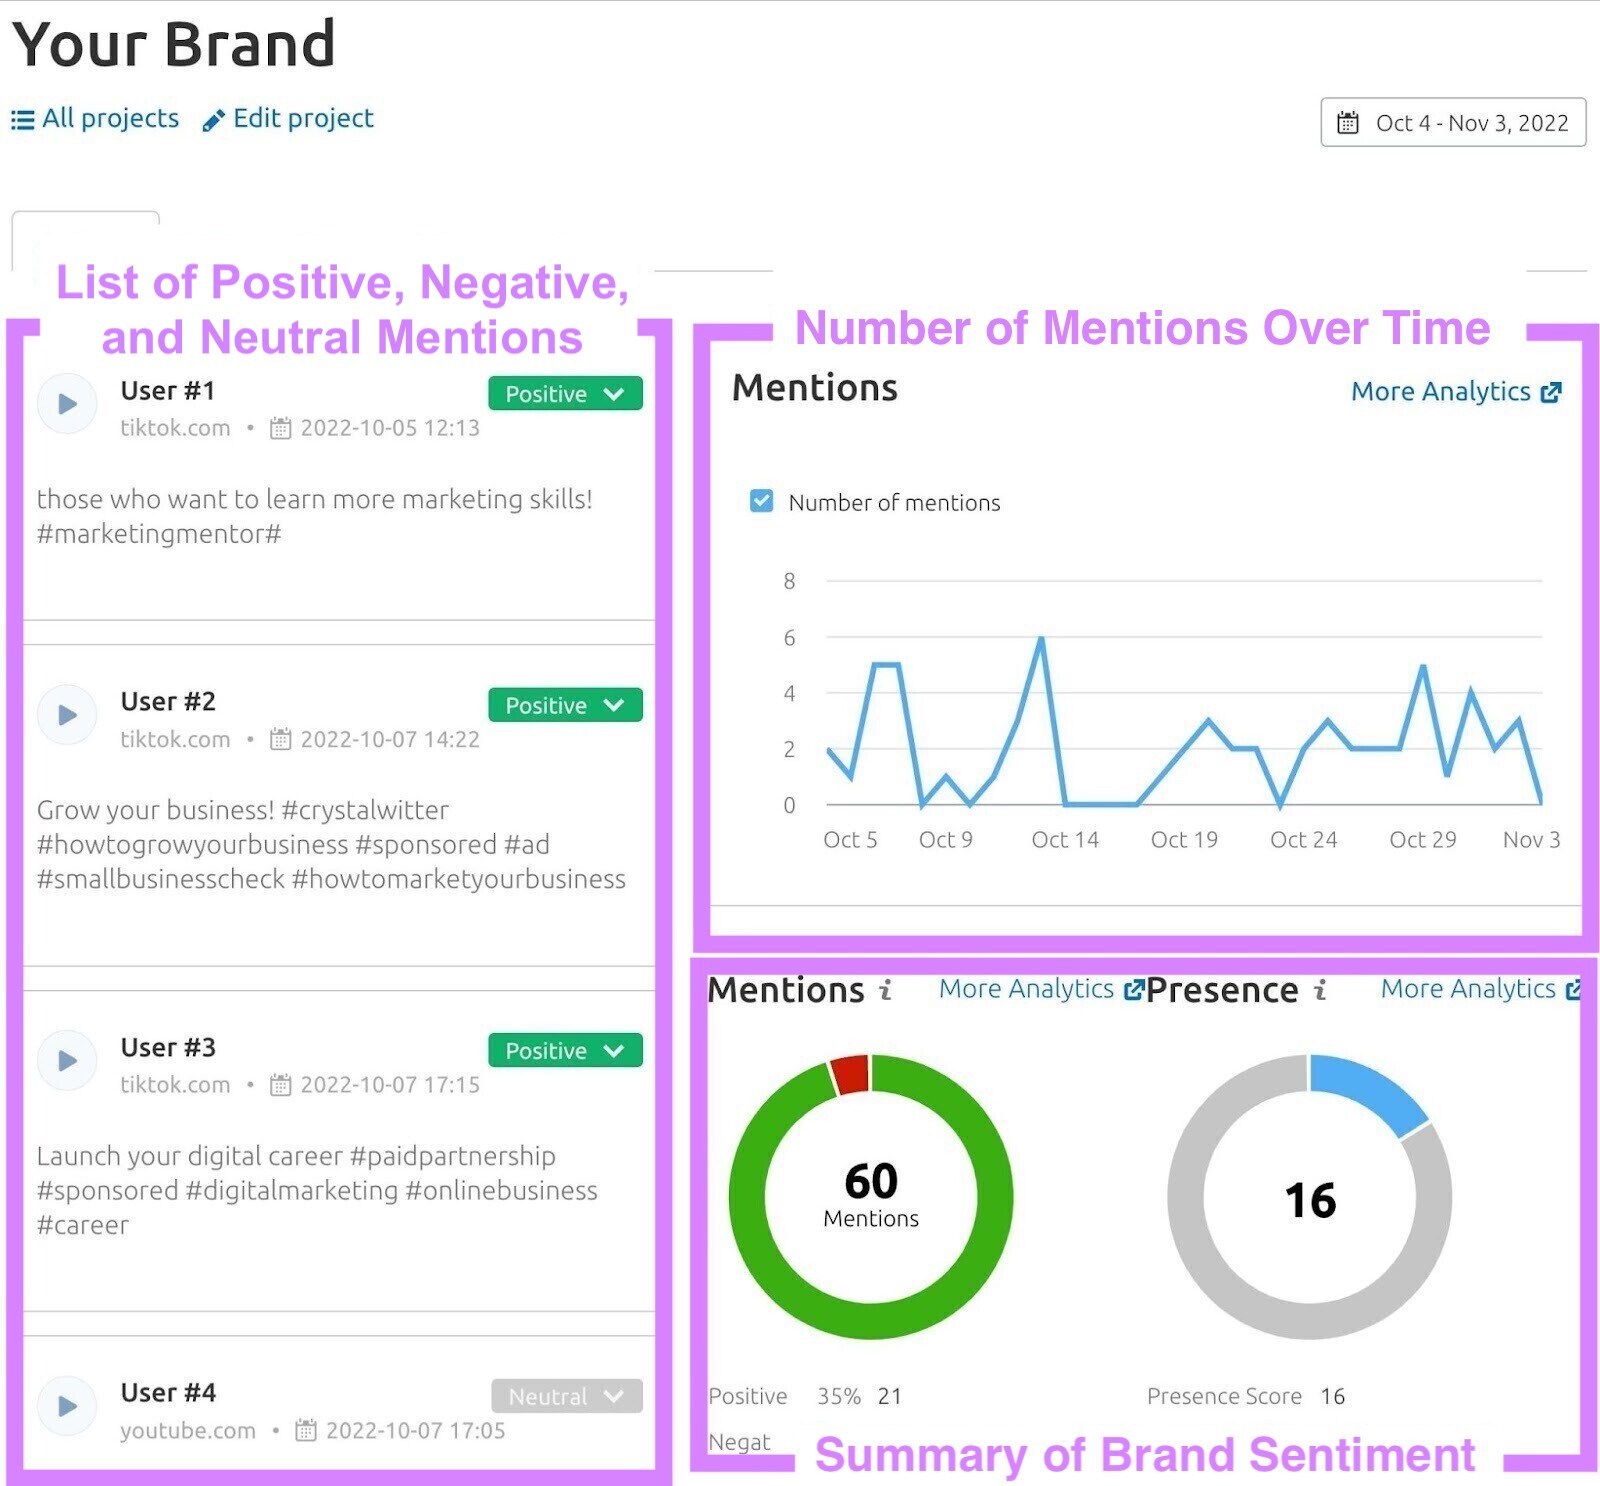 Media Monitoring report dashboard, showing a list of positive, negative, and neutral mentions, number of mentions over time and summary of brand sentiment